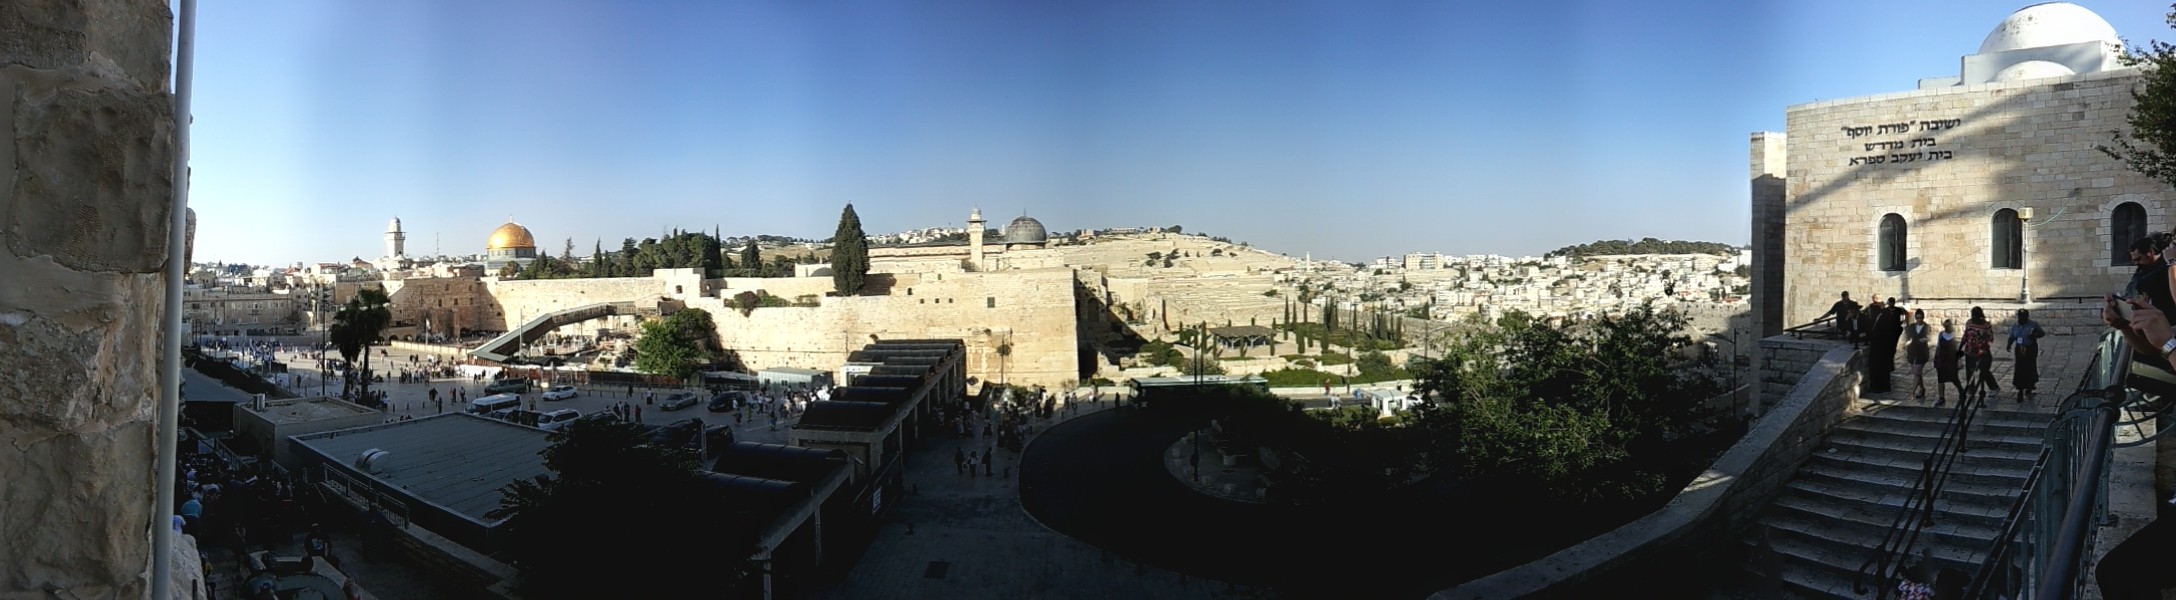 The plaza in front of the exposed section of the Western Wall of the second Jewish Temple (the "Wailing Wall"). Visible in the panorama is the Mount of Olives and various key locations in Jewish and Muslim theology, including the place of resurrection of all Jews and both Jewish (Gehenna) and Muslim hells (Jahannam).